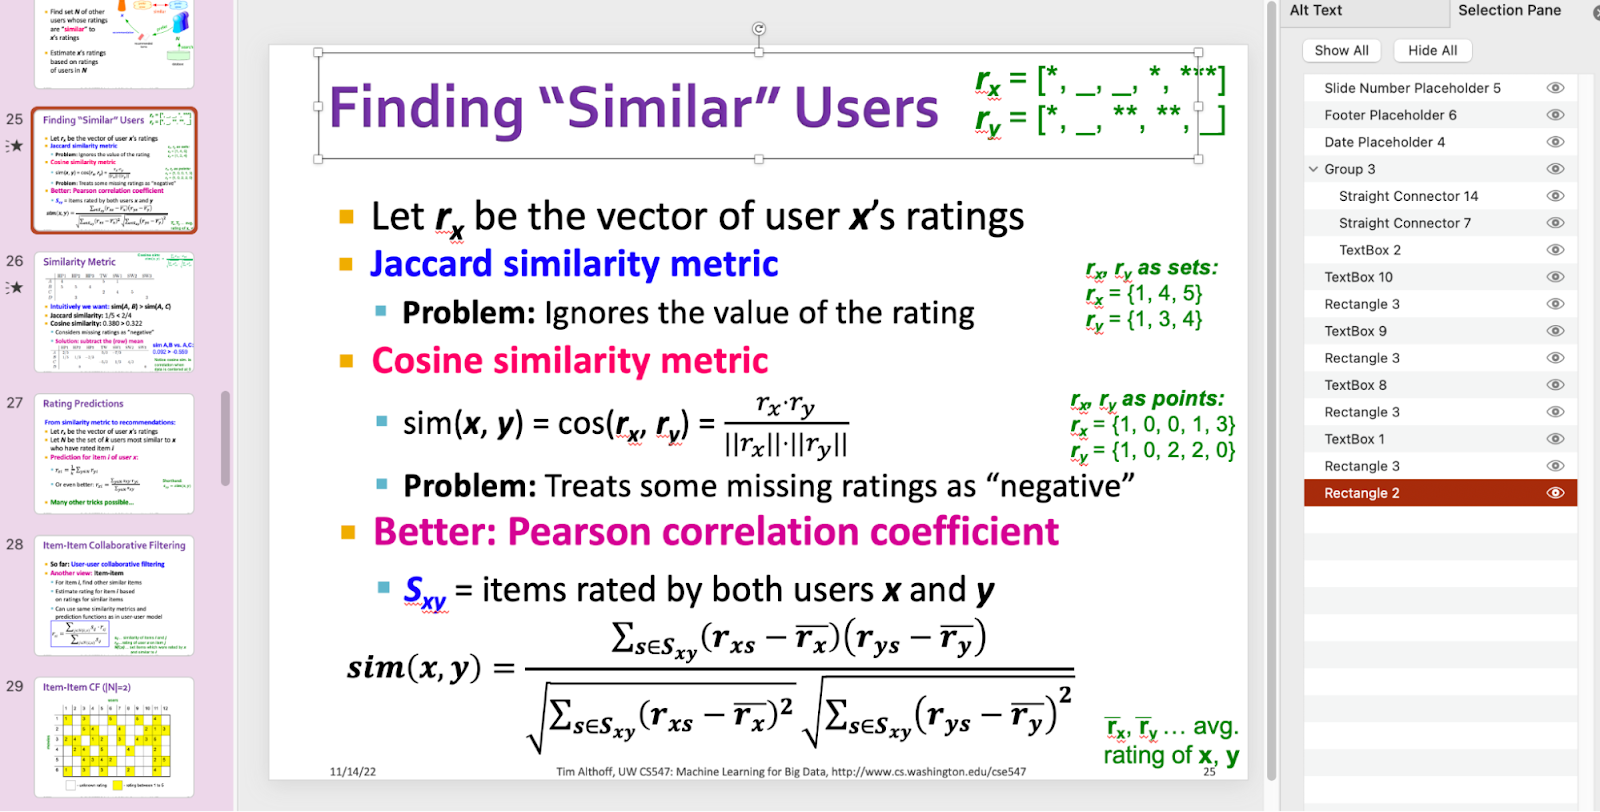 This is a screenshot of a powerpoint slide and the selection pane. On the left, there is a powerpoint slide with a few formulas about "Jaccard Similarity Metric", "Cosine Similarity Metric", and "Pearson Correlation Coefficient". Next to each formula are some explanation that would be animated to display. On the right, the selection pane displays the reading orders of these elements on the powerpoint slide